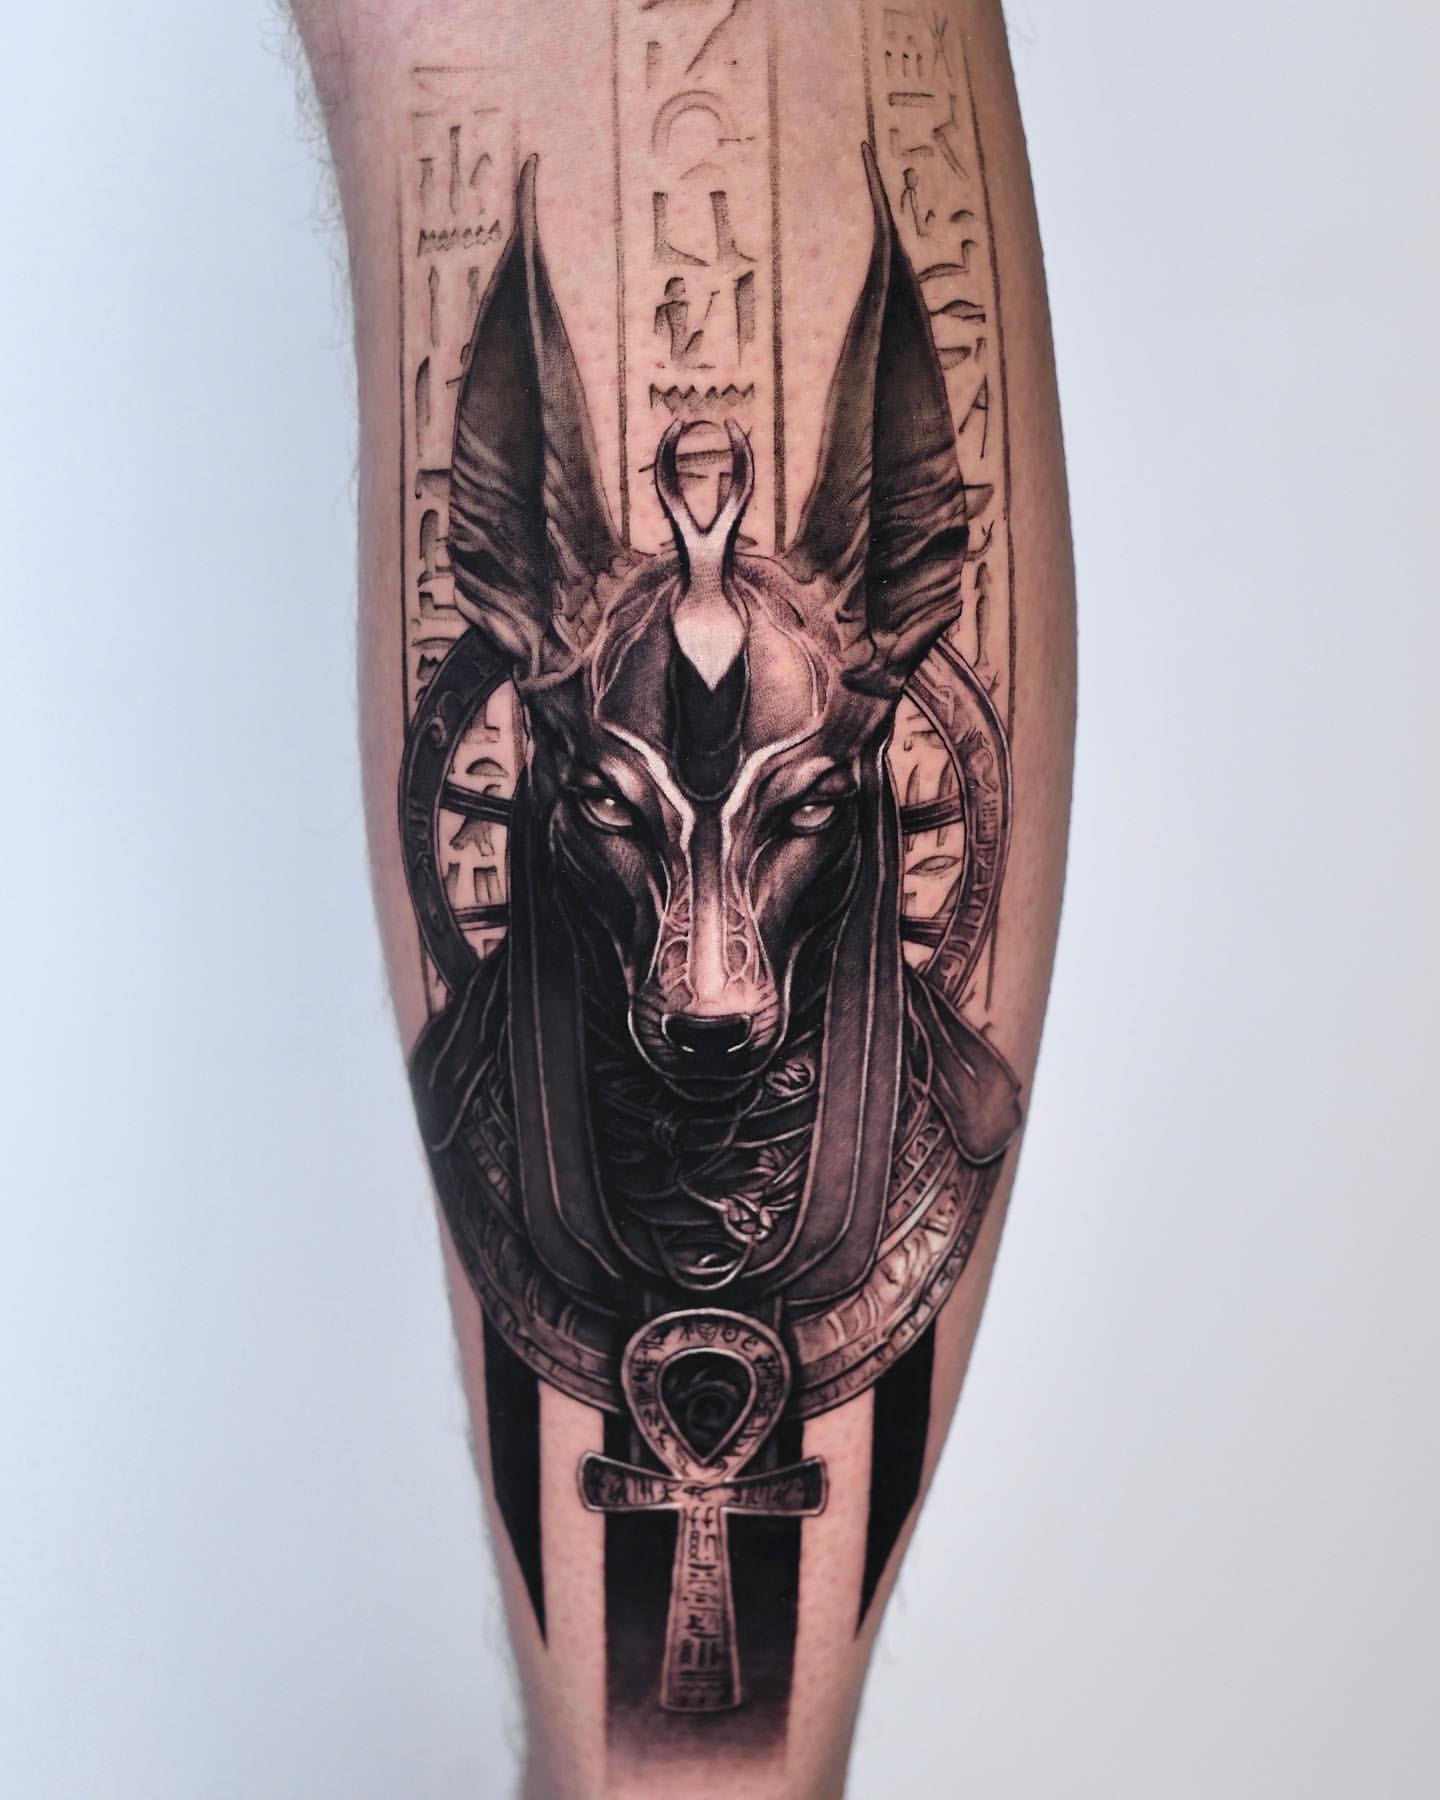 Outer Anubis leg sleeve finished 🙌🏼 Top and bottom healed, mid fresh. Let  me know what you think 😊 Done with @cheyenne_tattoo... | Instagram